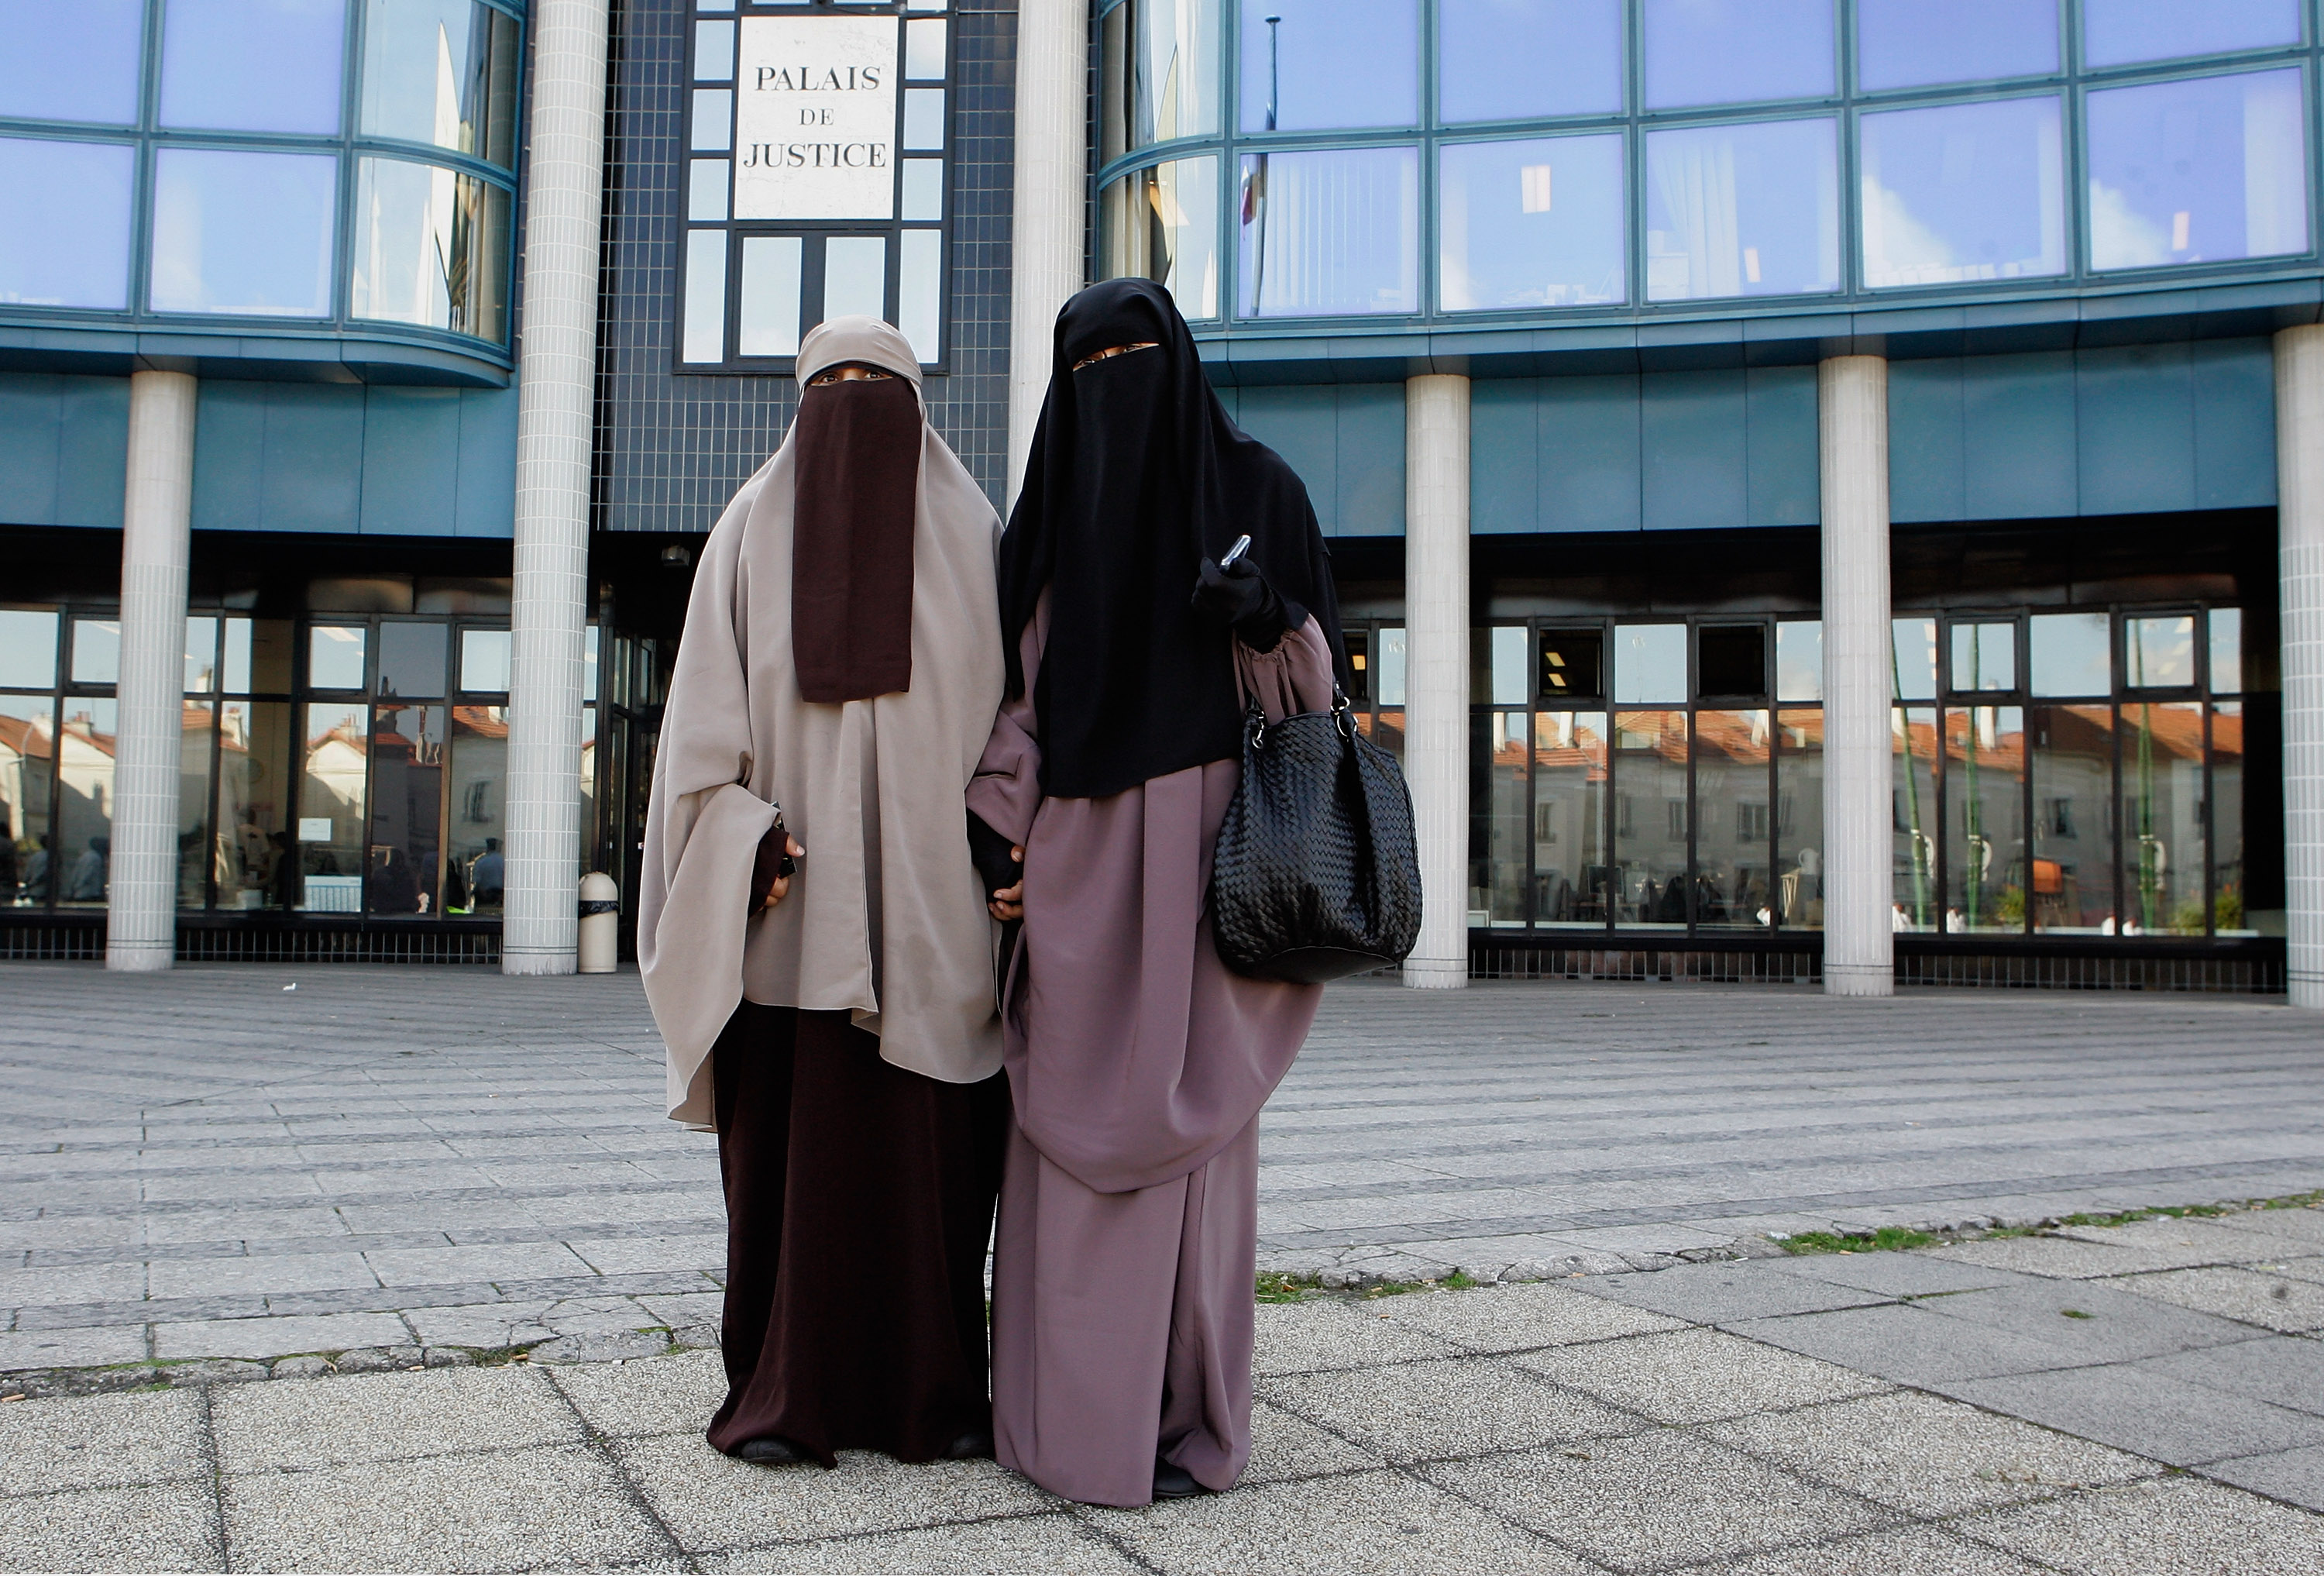 Hind Ahmas, 32, (R) stands with Kenza Drider, 32, as she leaves the court after being convicted as the first woman wearing a niqab after France's nationwide ban on the wearing of face veils on Sept. 22, 2011 in Meaux, France. (Franck Prevel—Getty Images)